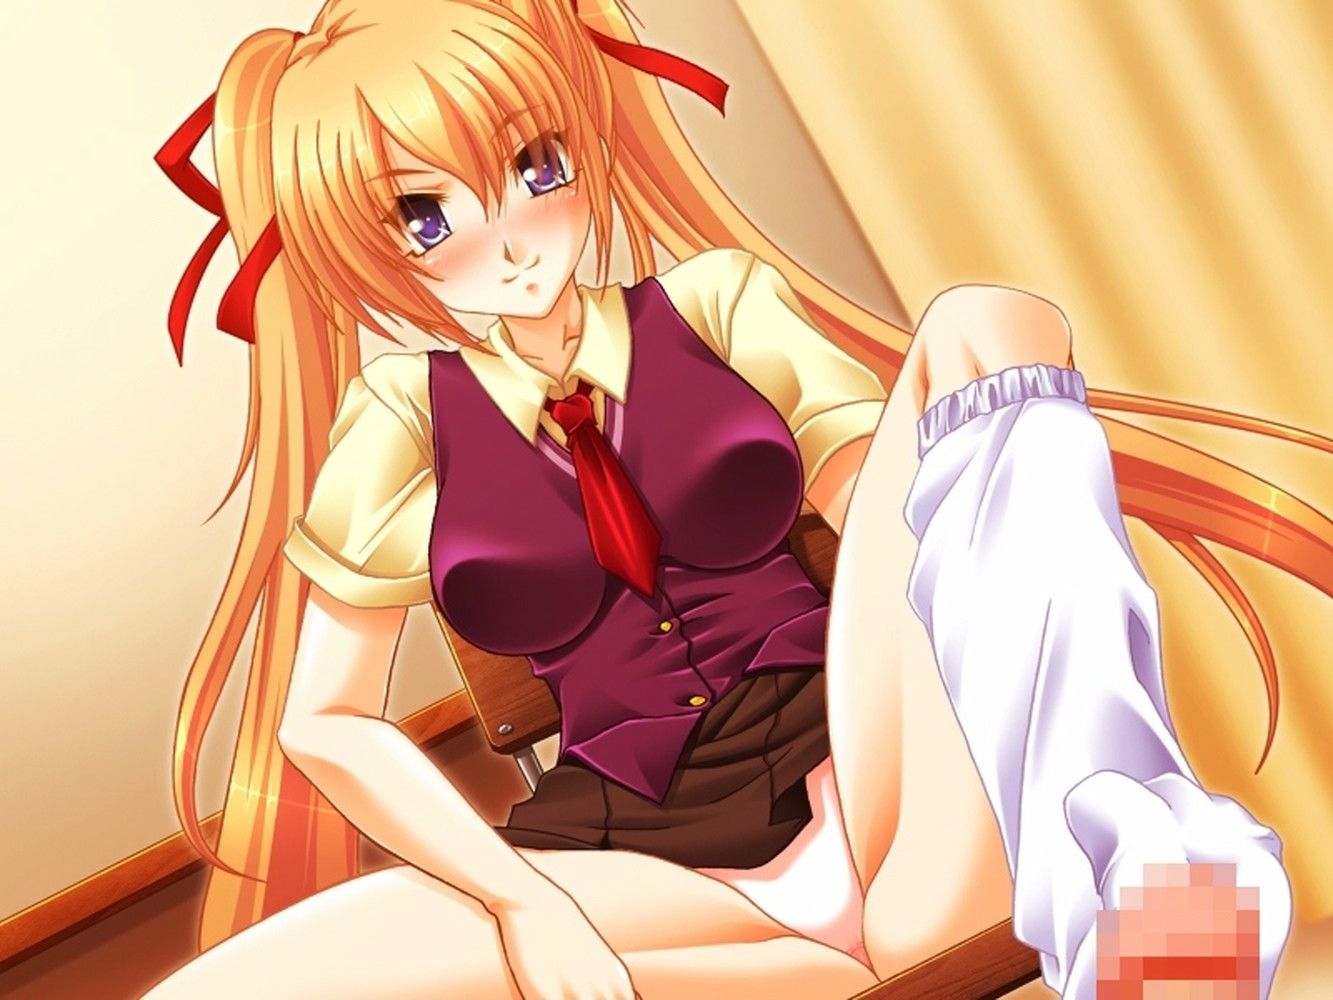 Secondary erotic image of a girl who is a footjob in the eye from the top wwww 5